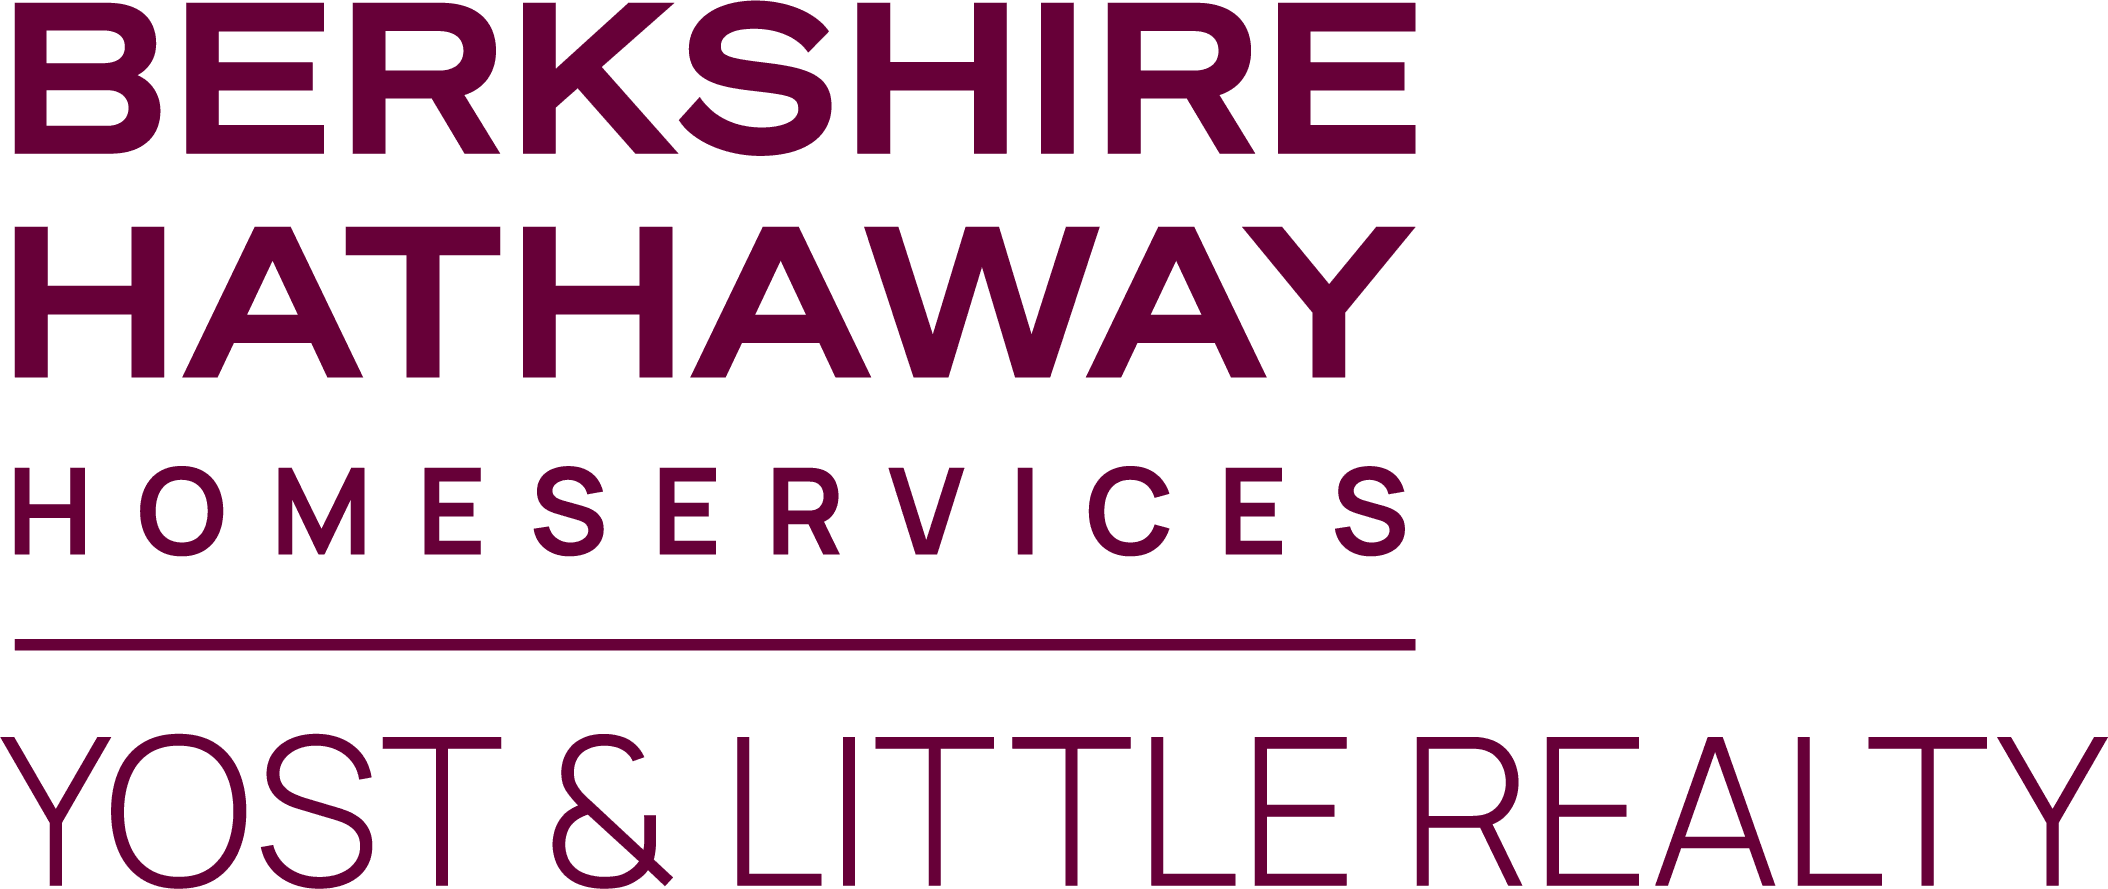 Berkshire Hathaway Home Services - Yost & Little Realty